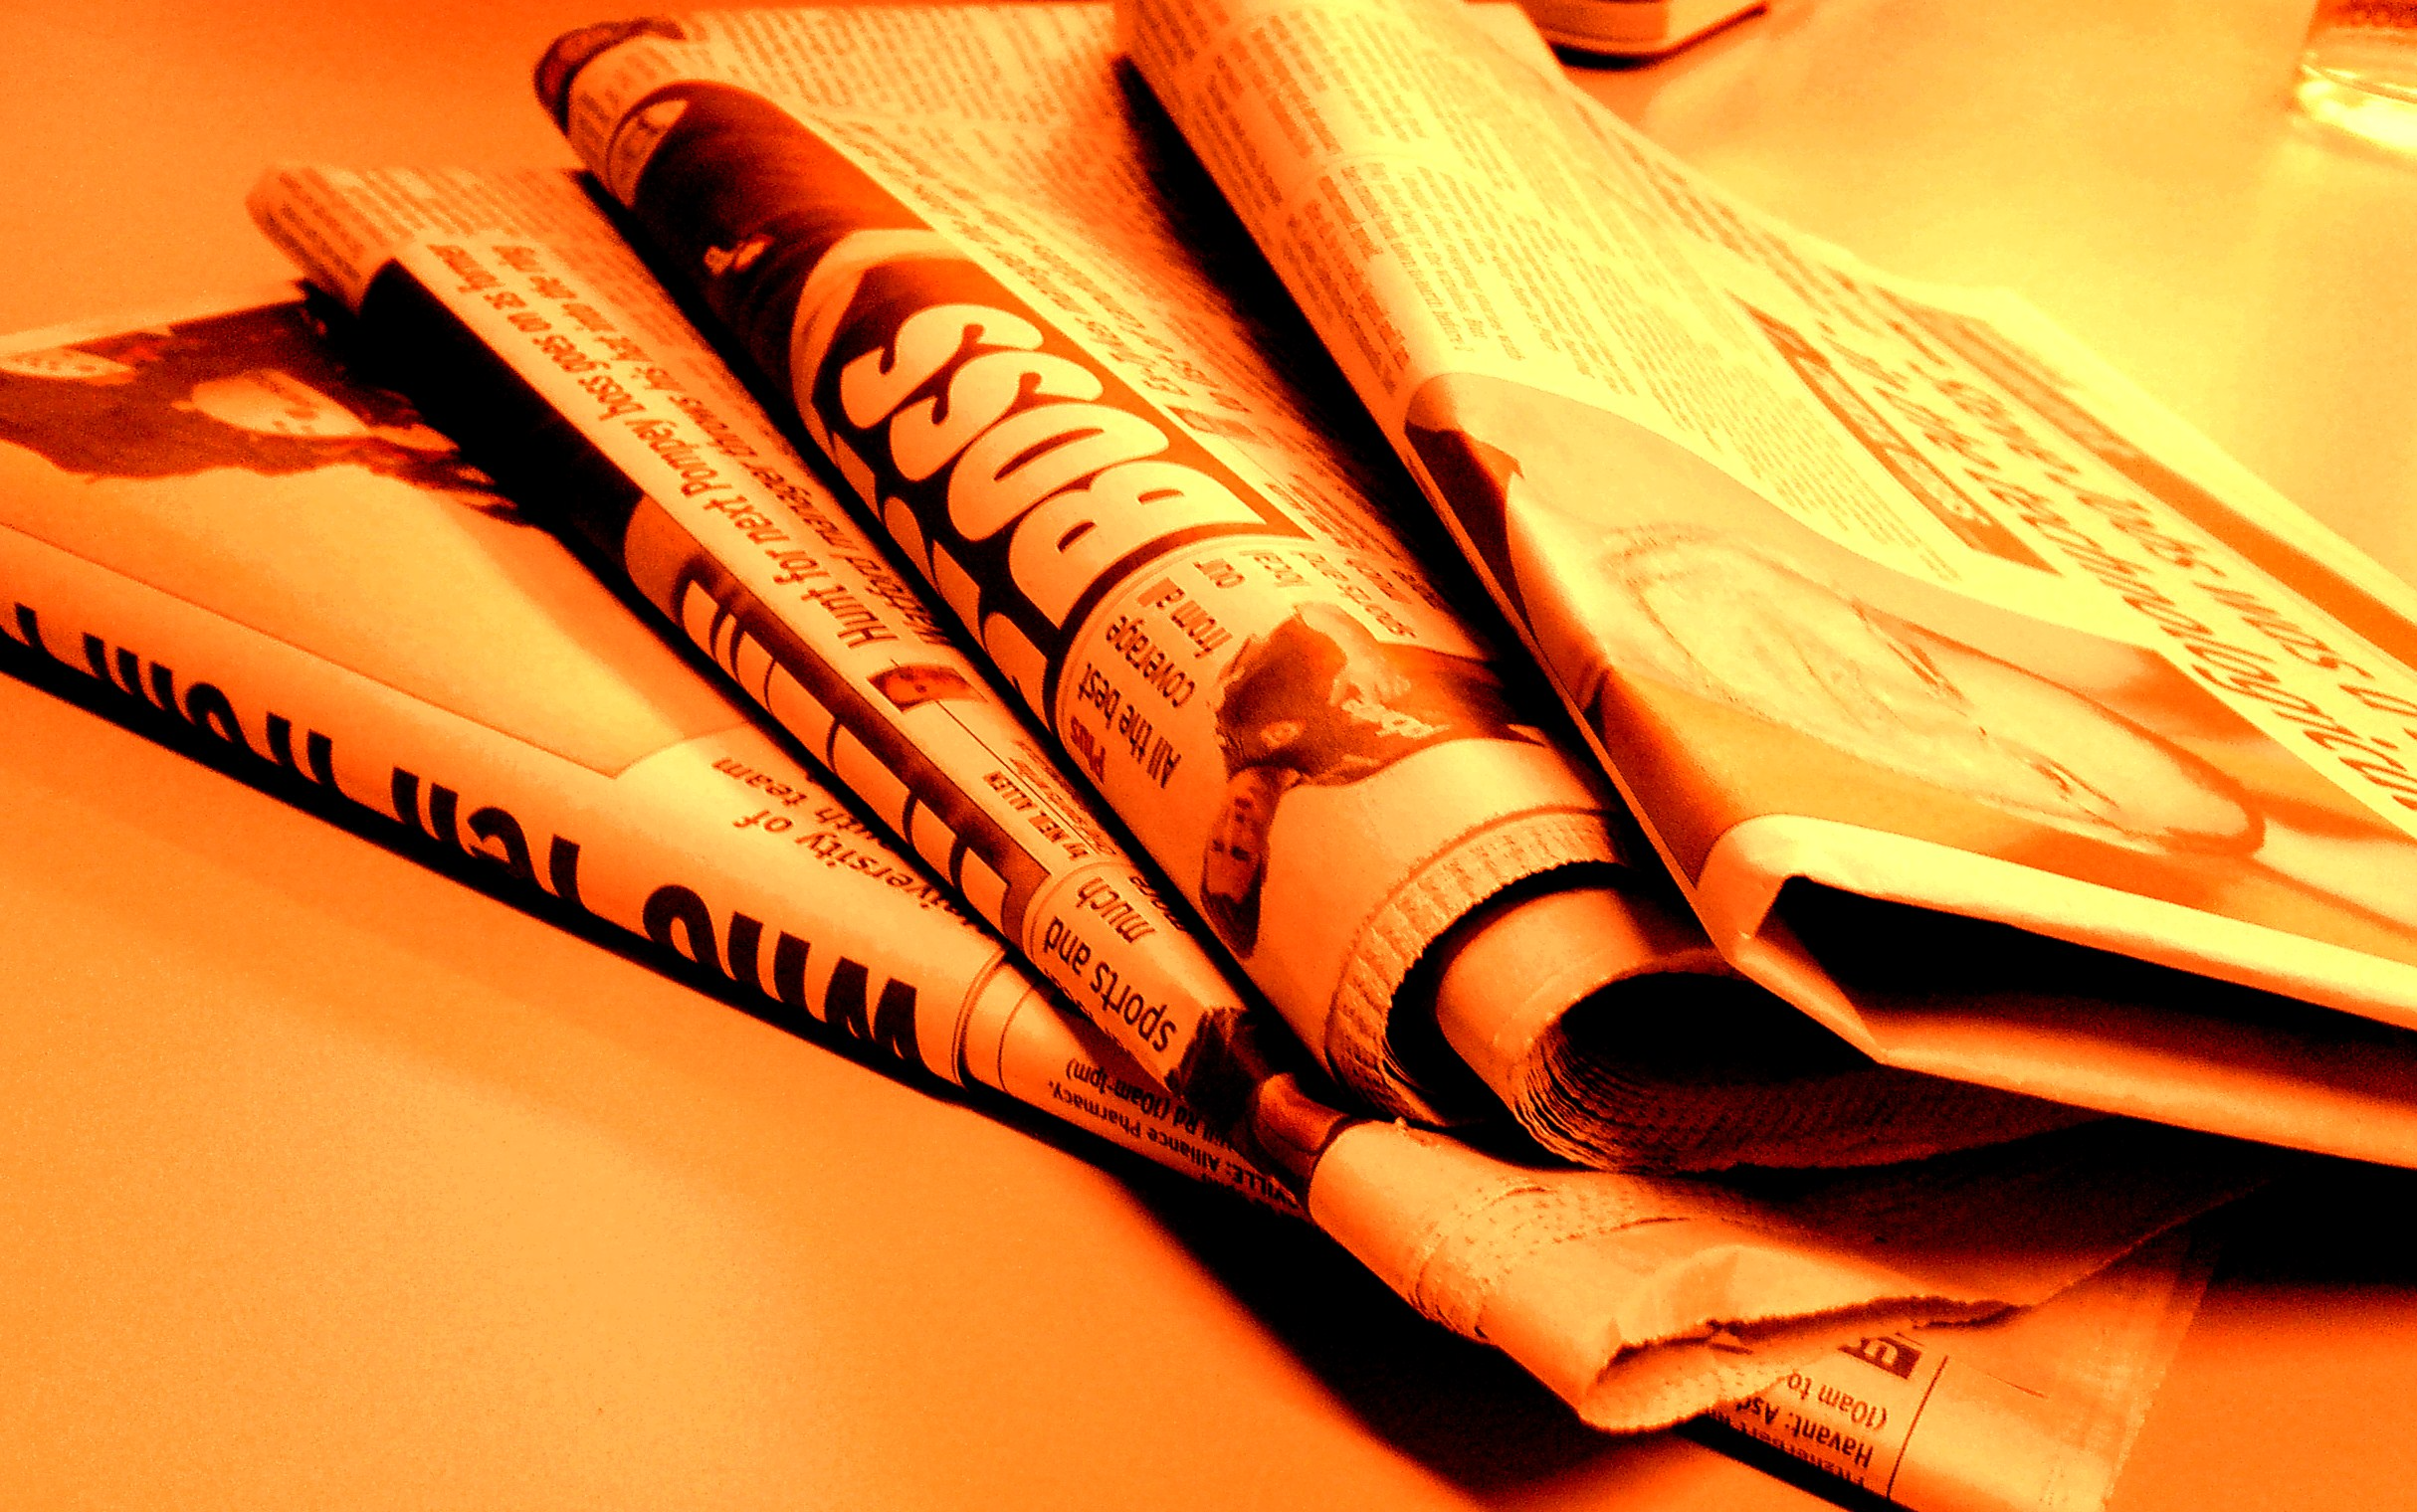 A stacks of newspapers, folded in half and bathed in orange light.